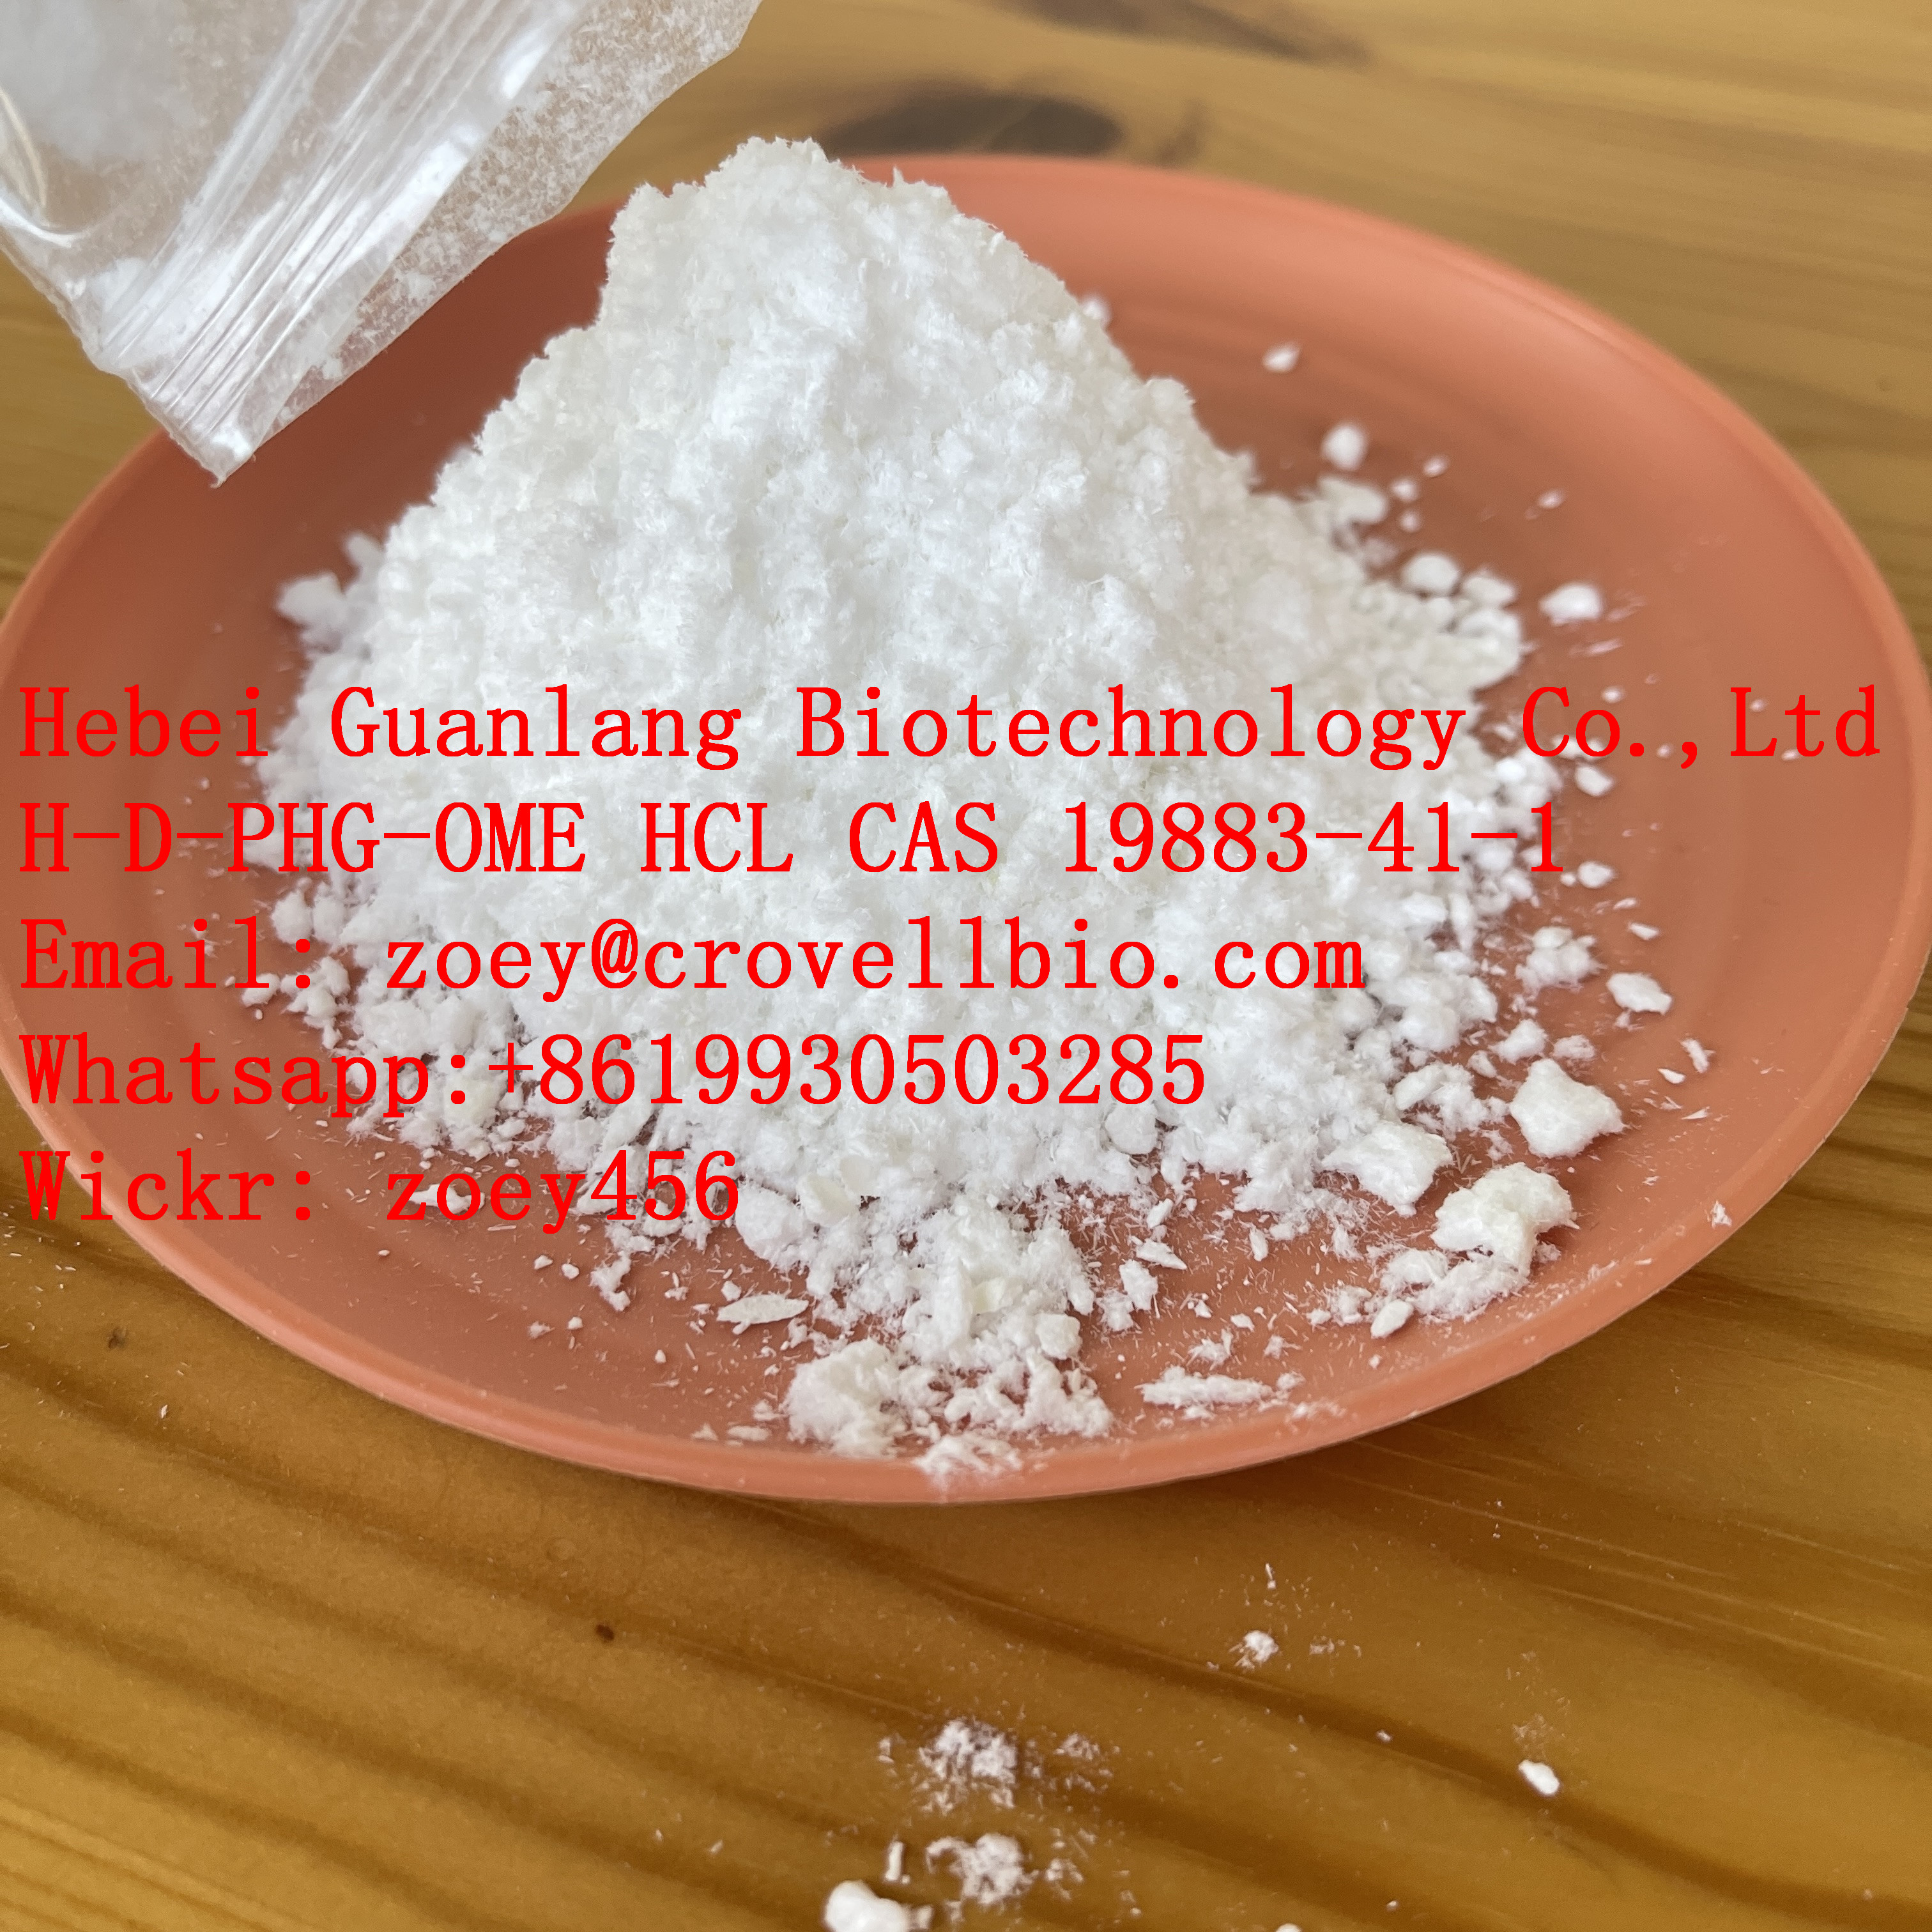 Factory supply CAS 19883-41-1 H-D-PHG-OME HCL supplier in China with low price  zoey@crovellbio.comBuy and SellHealth - BeautySouth DelhiBhikaji Cama Place